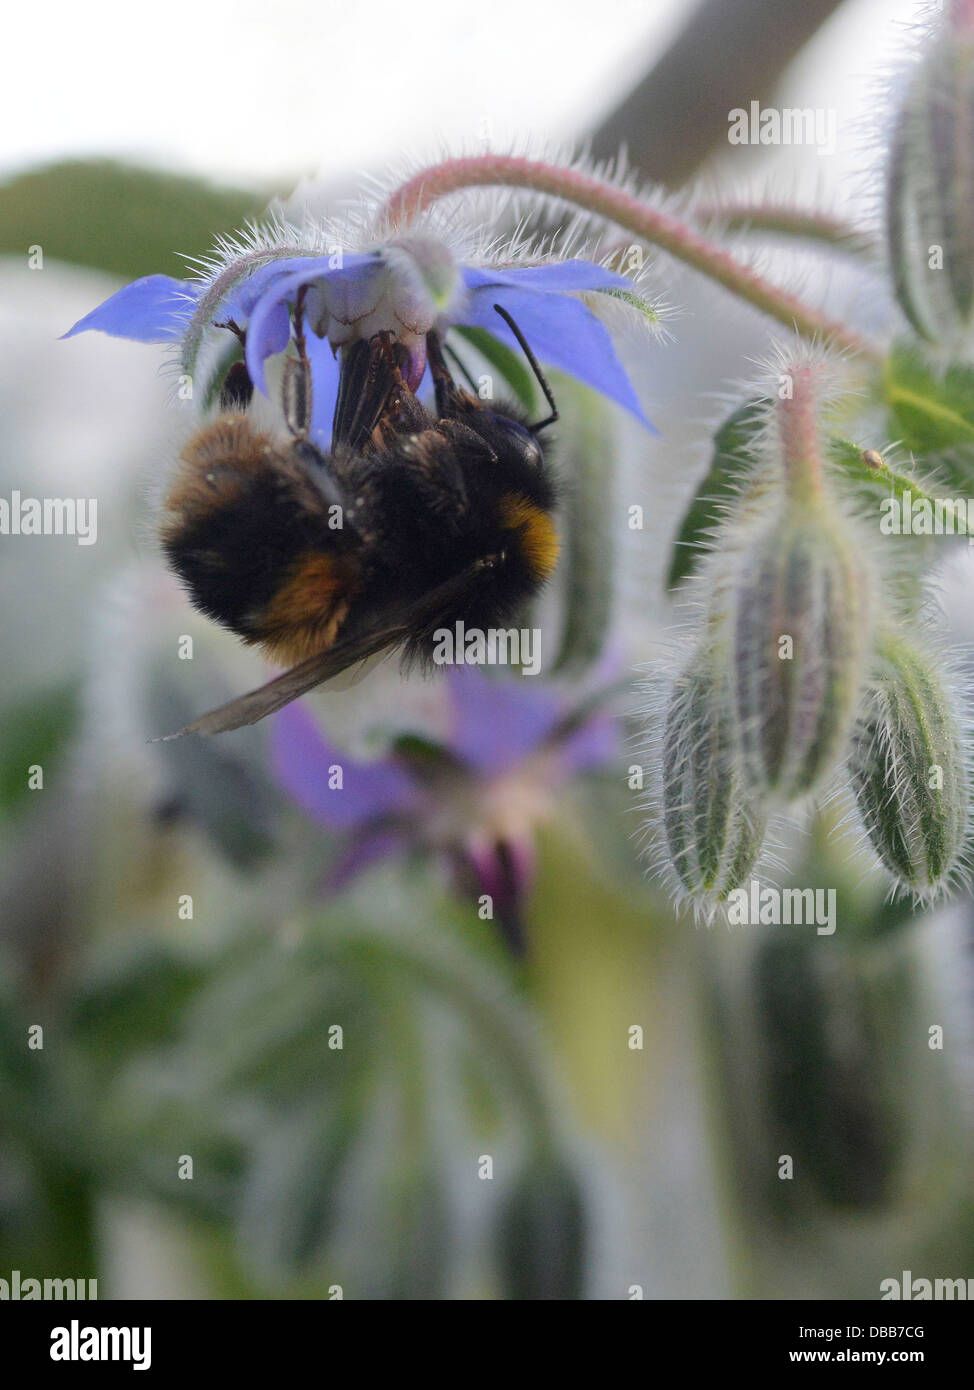 A bumble bee hanging on a borage flower. Stock Photo